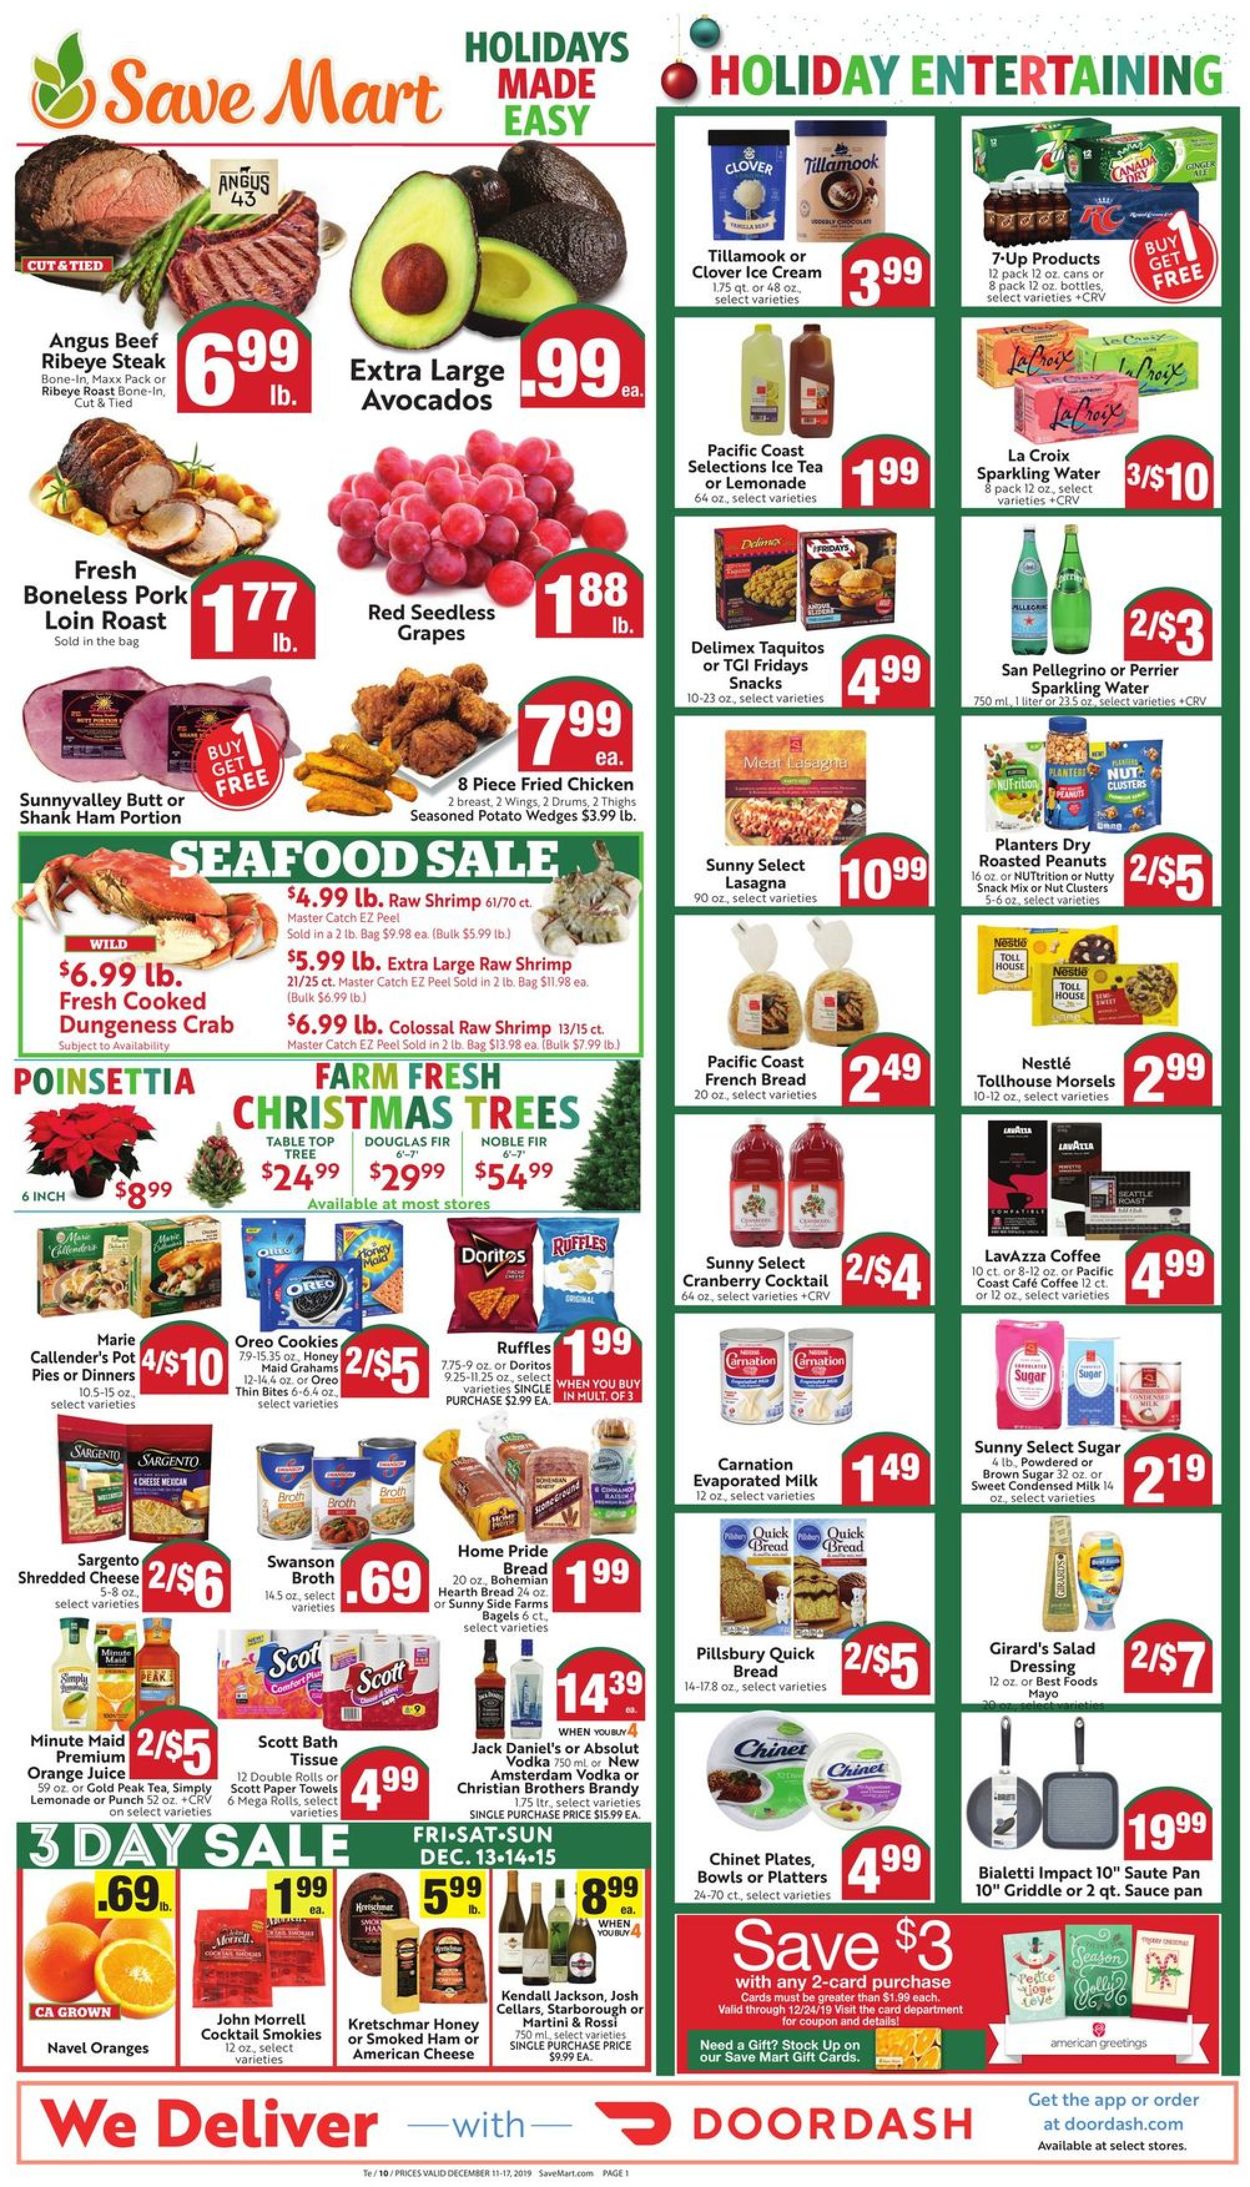 Catalogue Save Mart - Holidays Ad 2019 from 12/11/2019